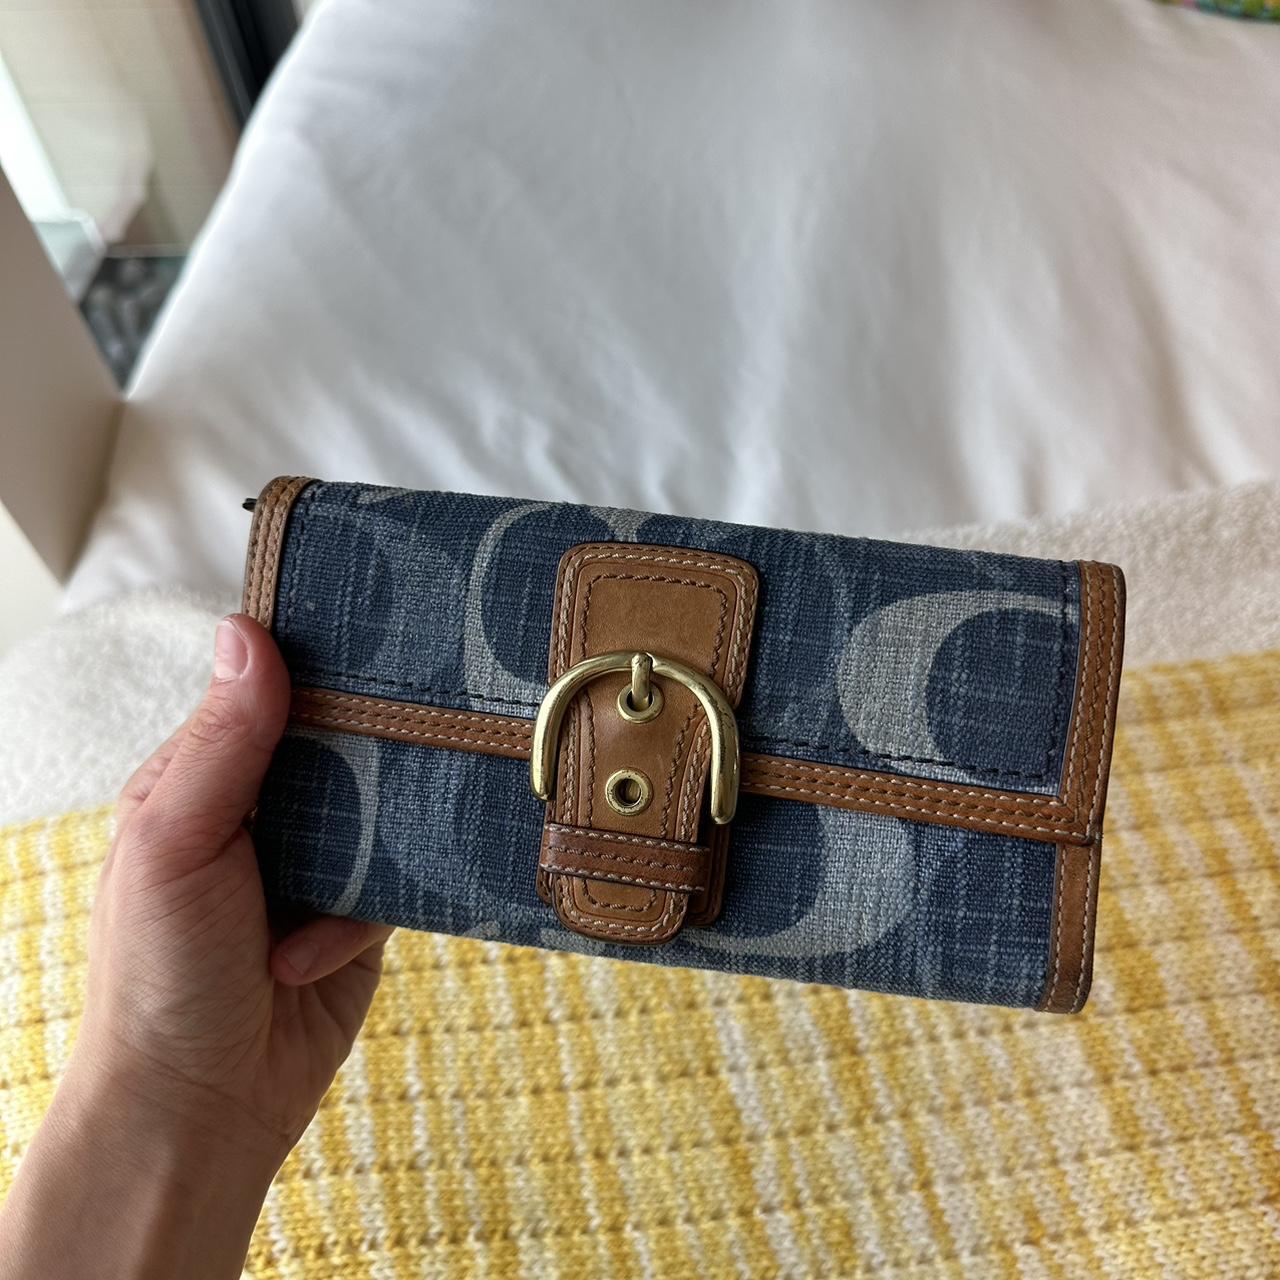 Coach Small Trifold Wallet In Signature - Depop